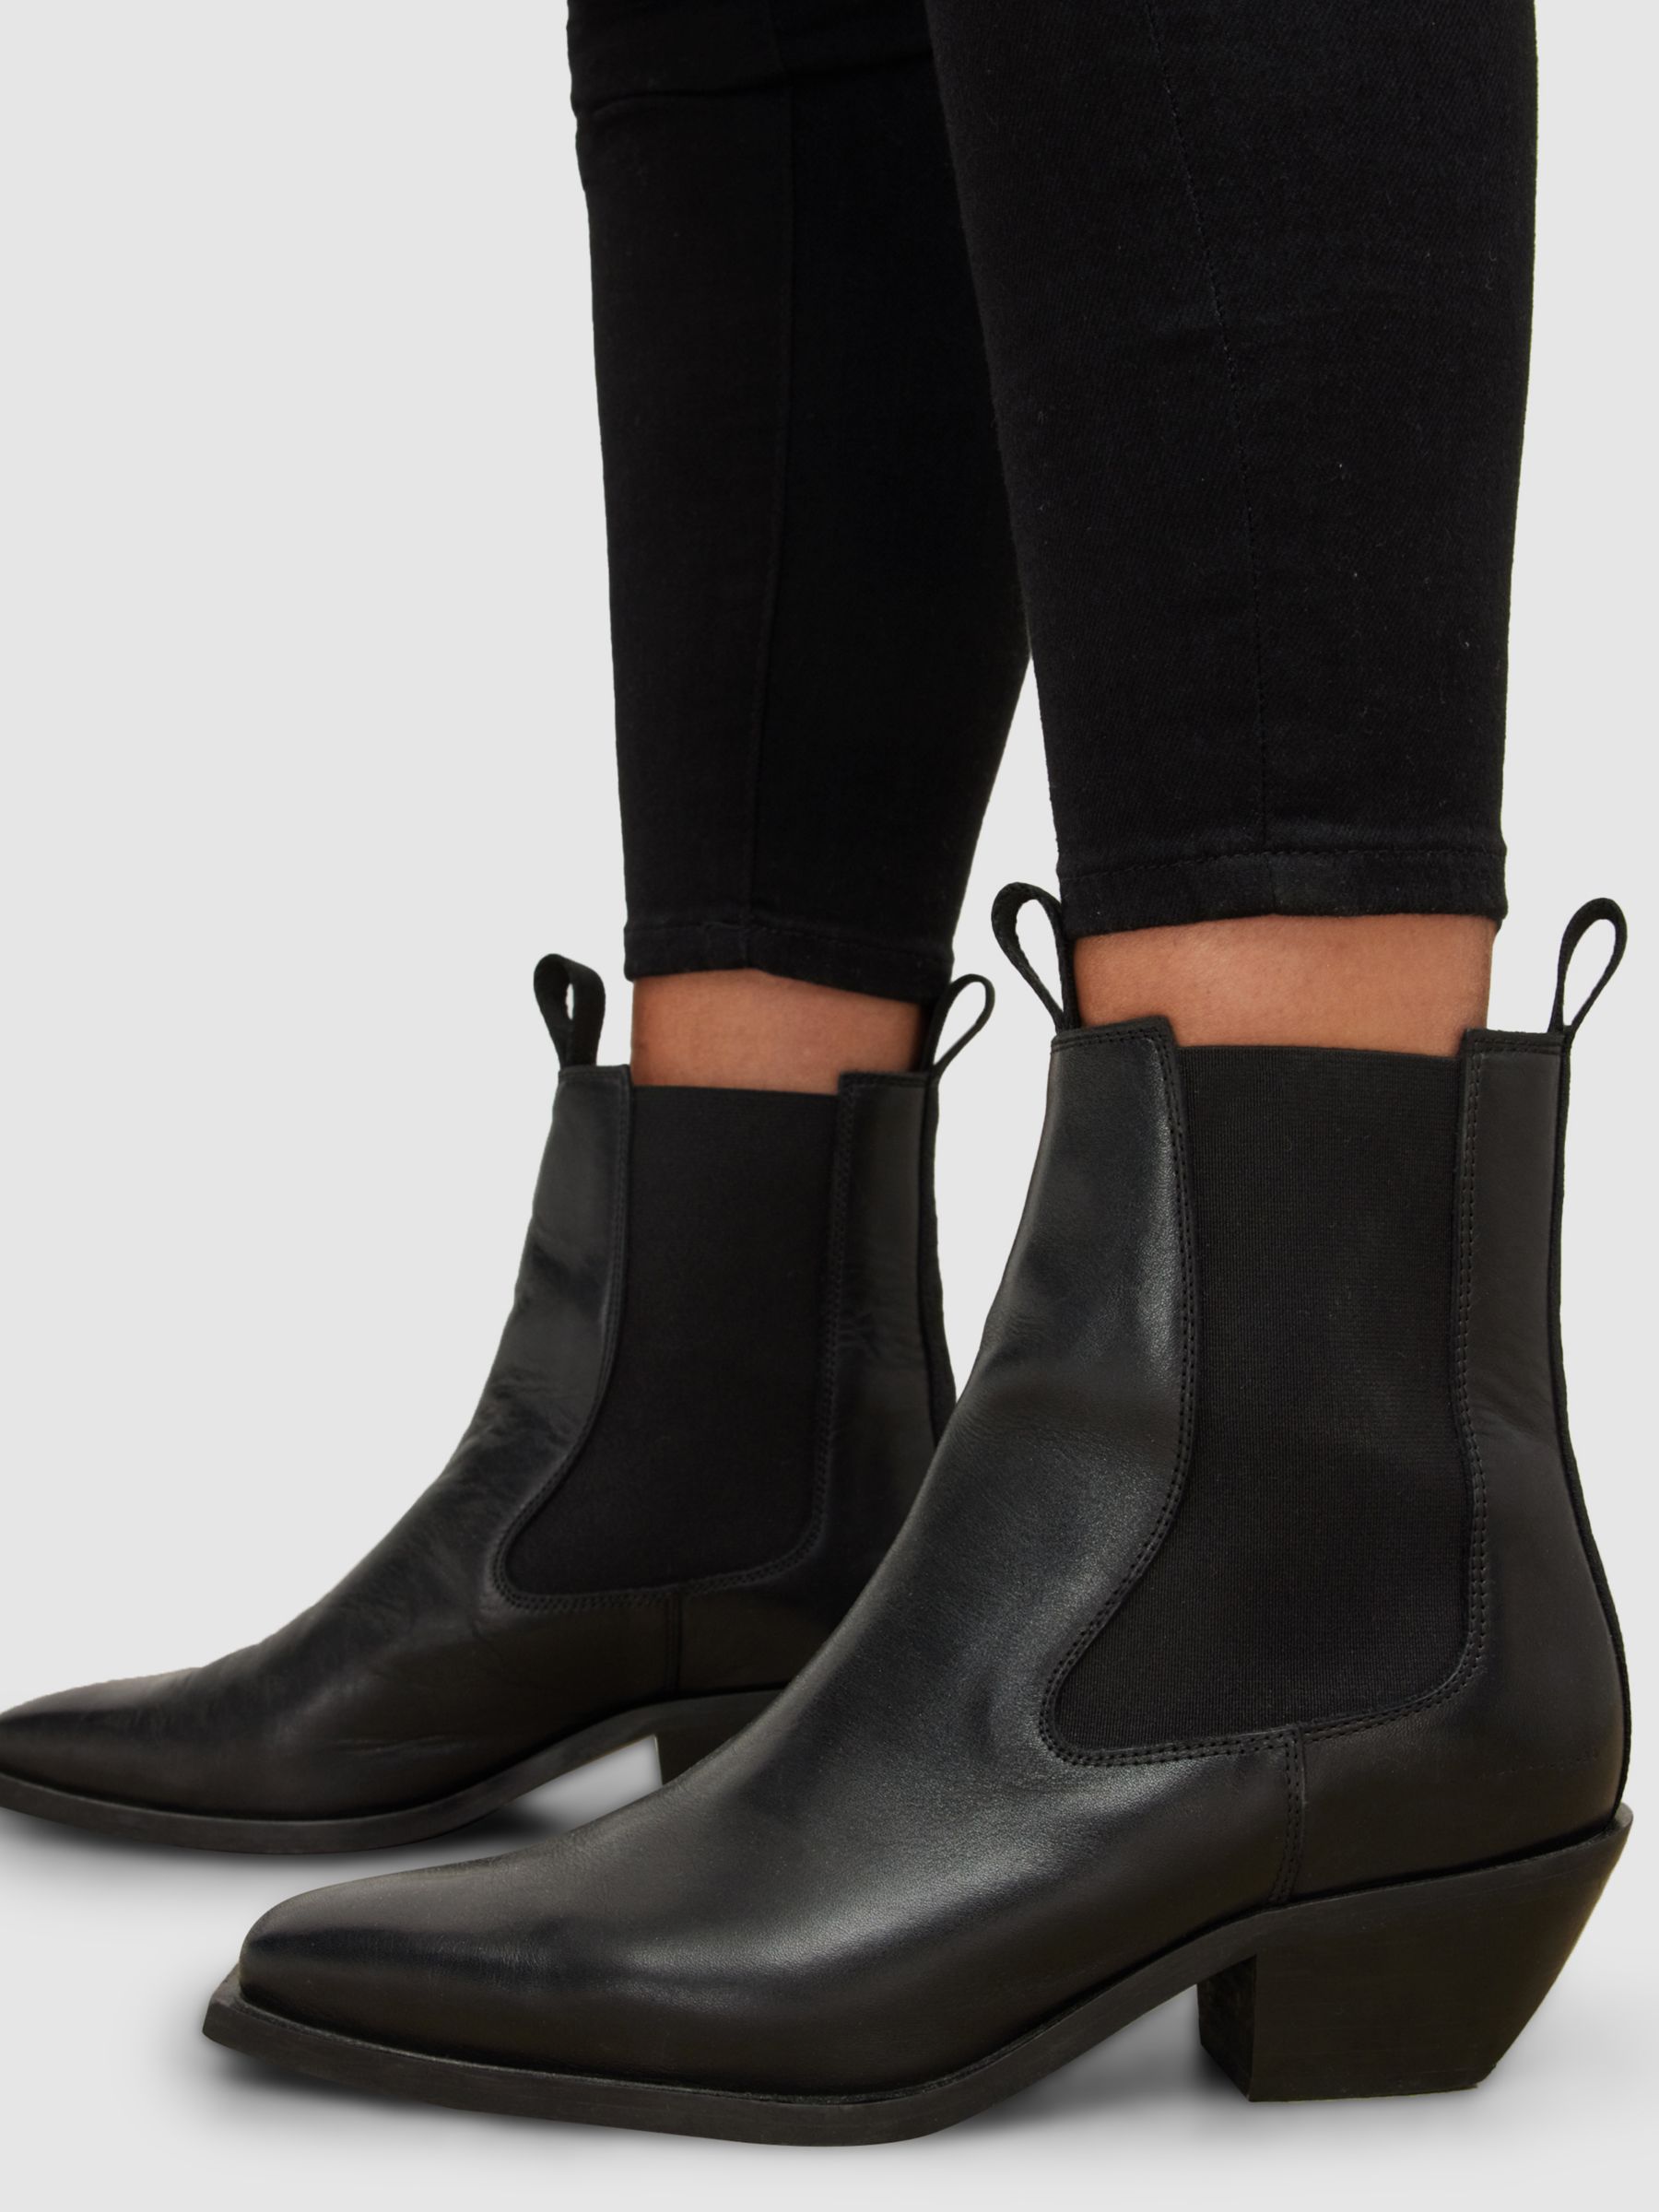 AllSaints Vally Leather Ankle Boots, Black at John Lewis & Partners